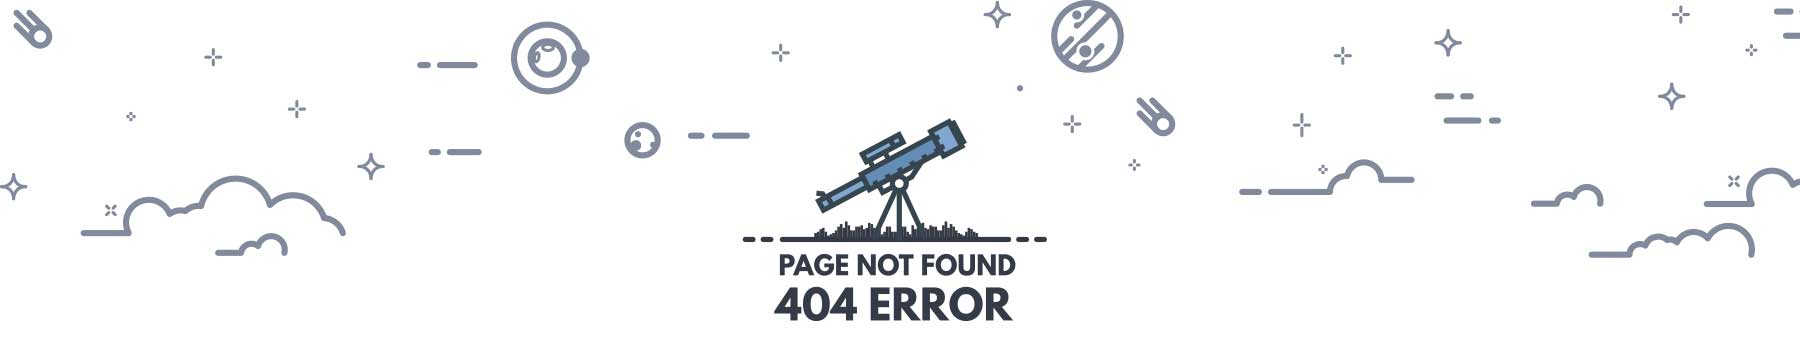 404 page not found showing a telescope in a field looking up at a star filled sky